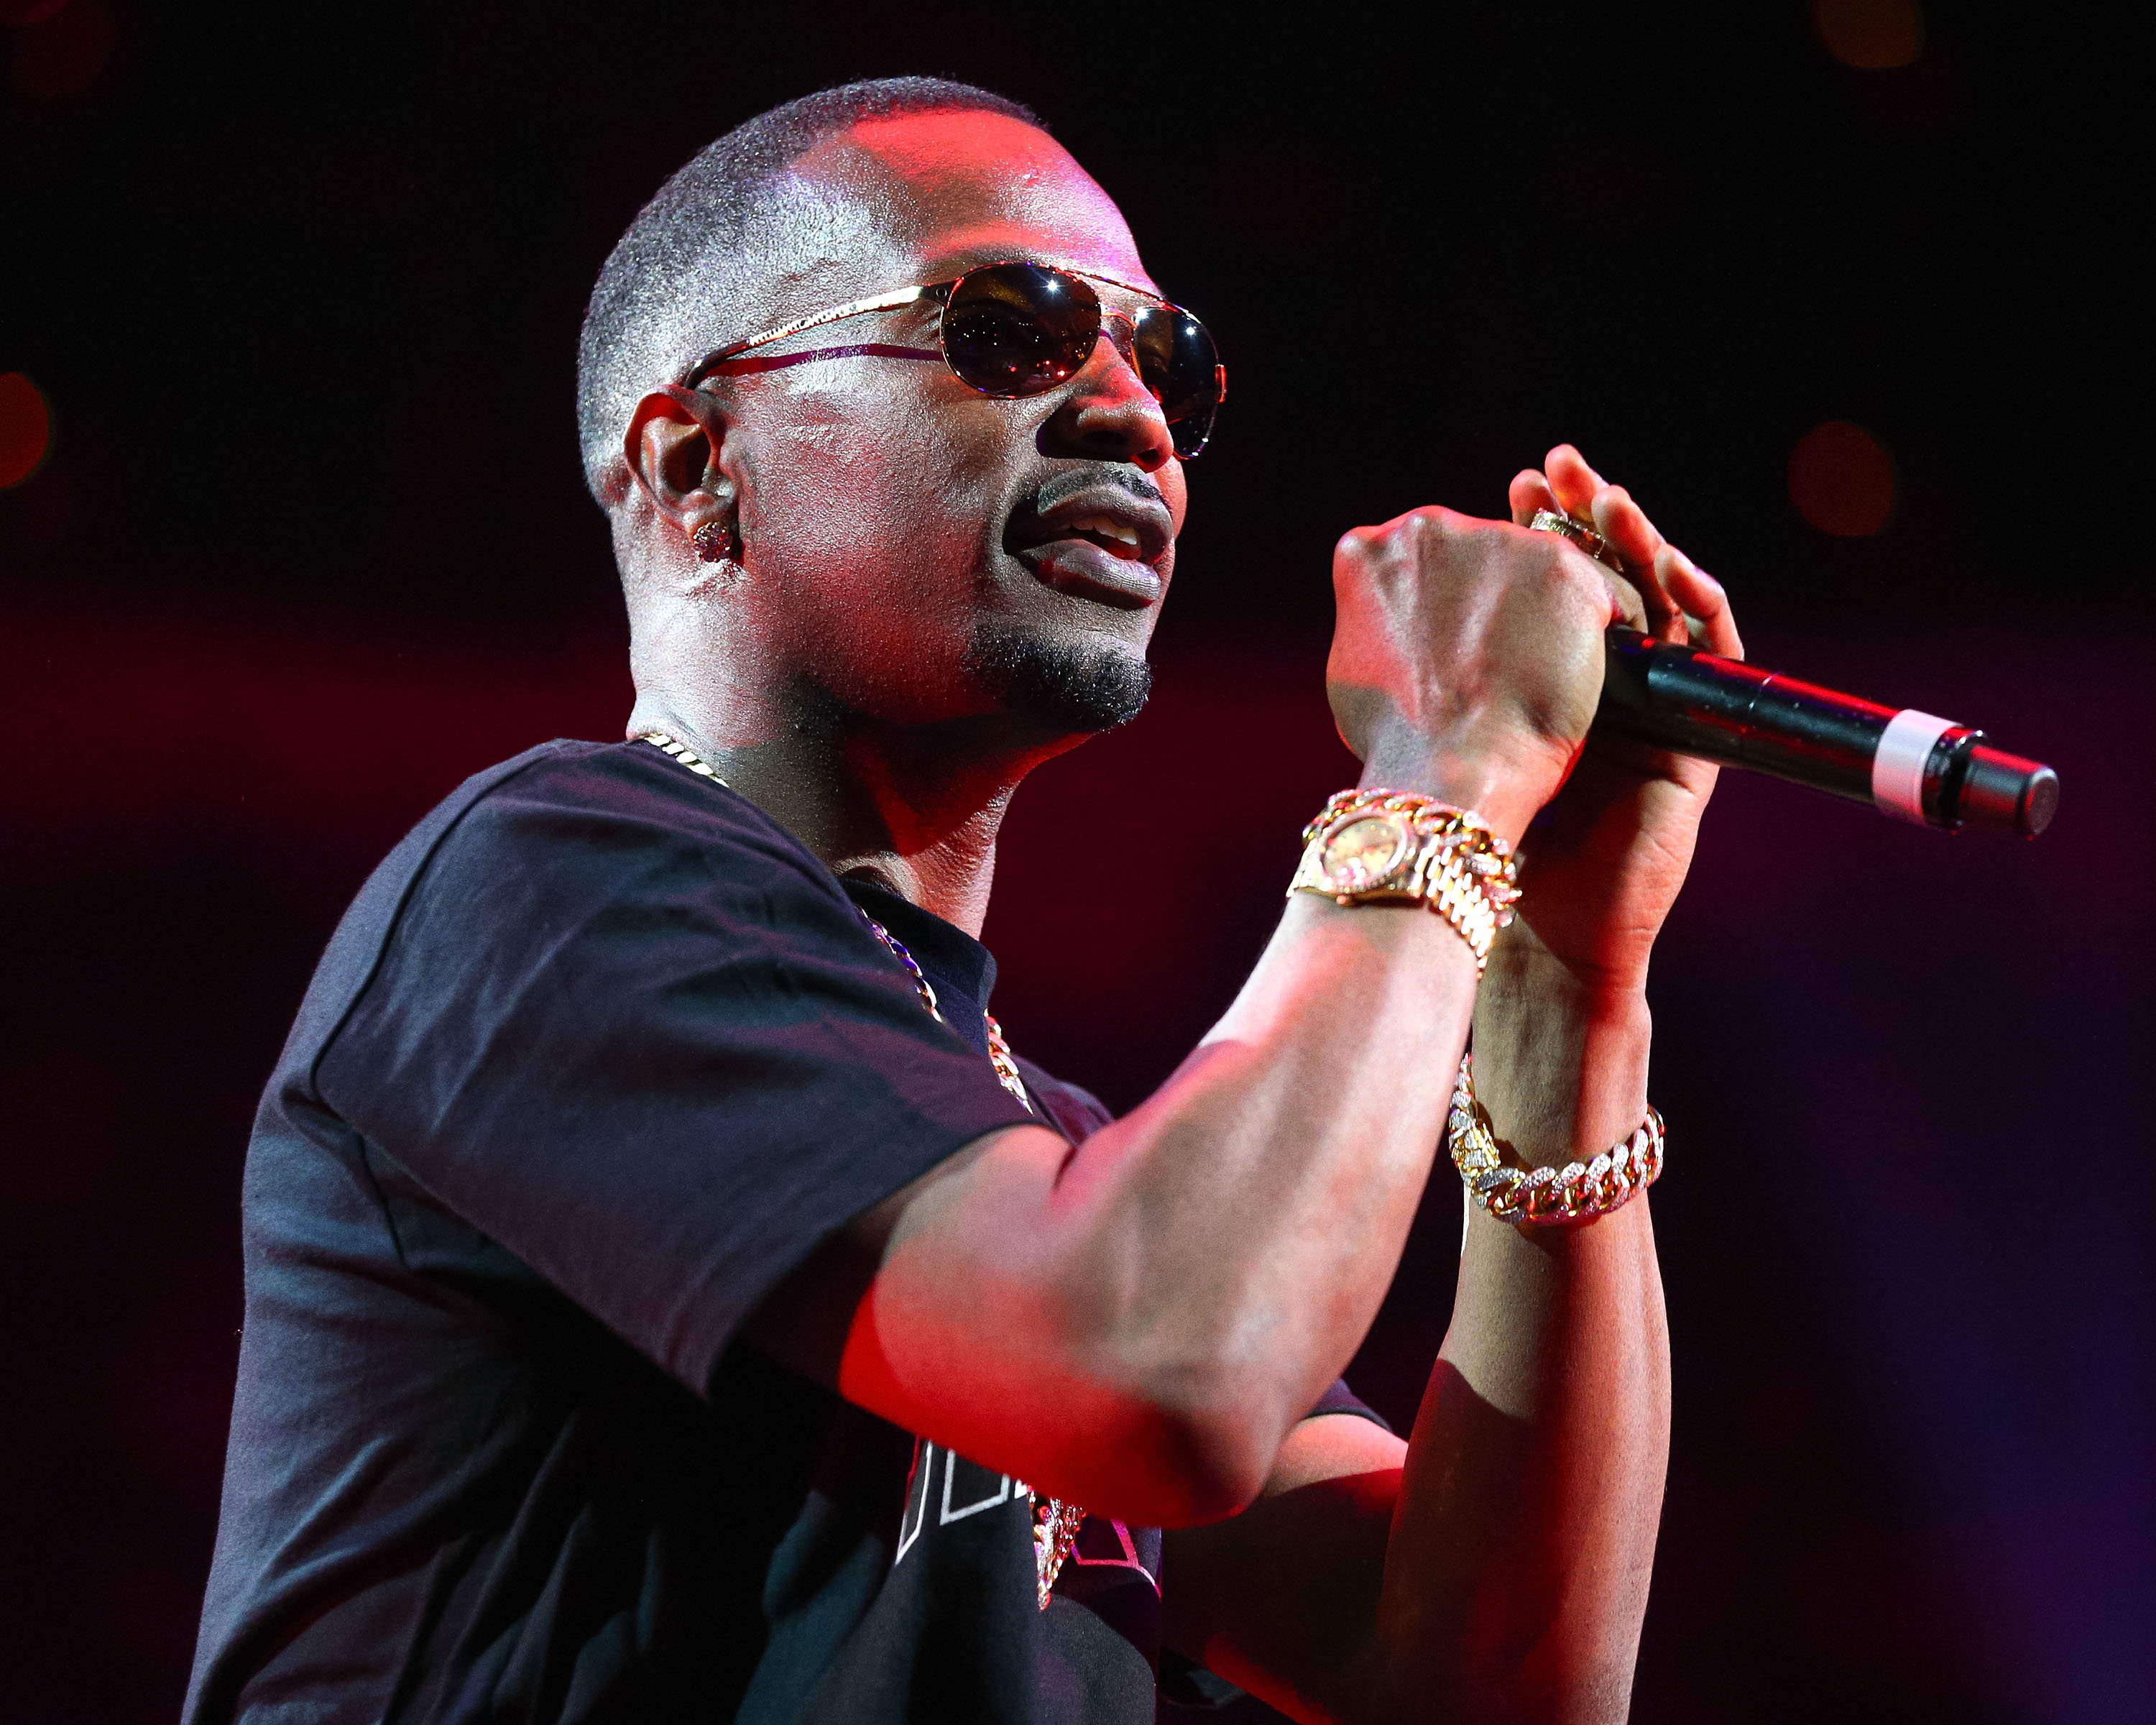 Juicy J Says His “Best Friend” Logic Inspired His Iconic Producer Tag